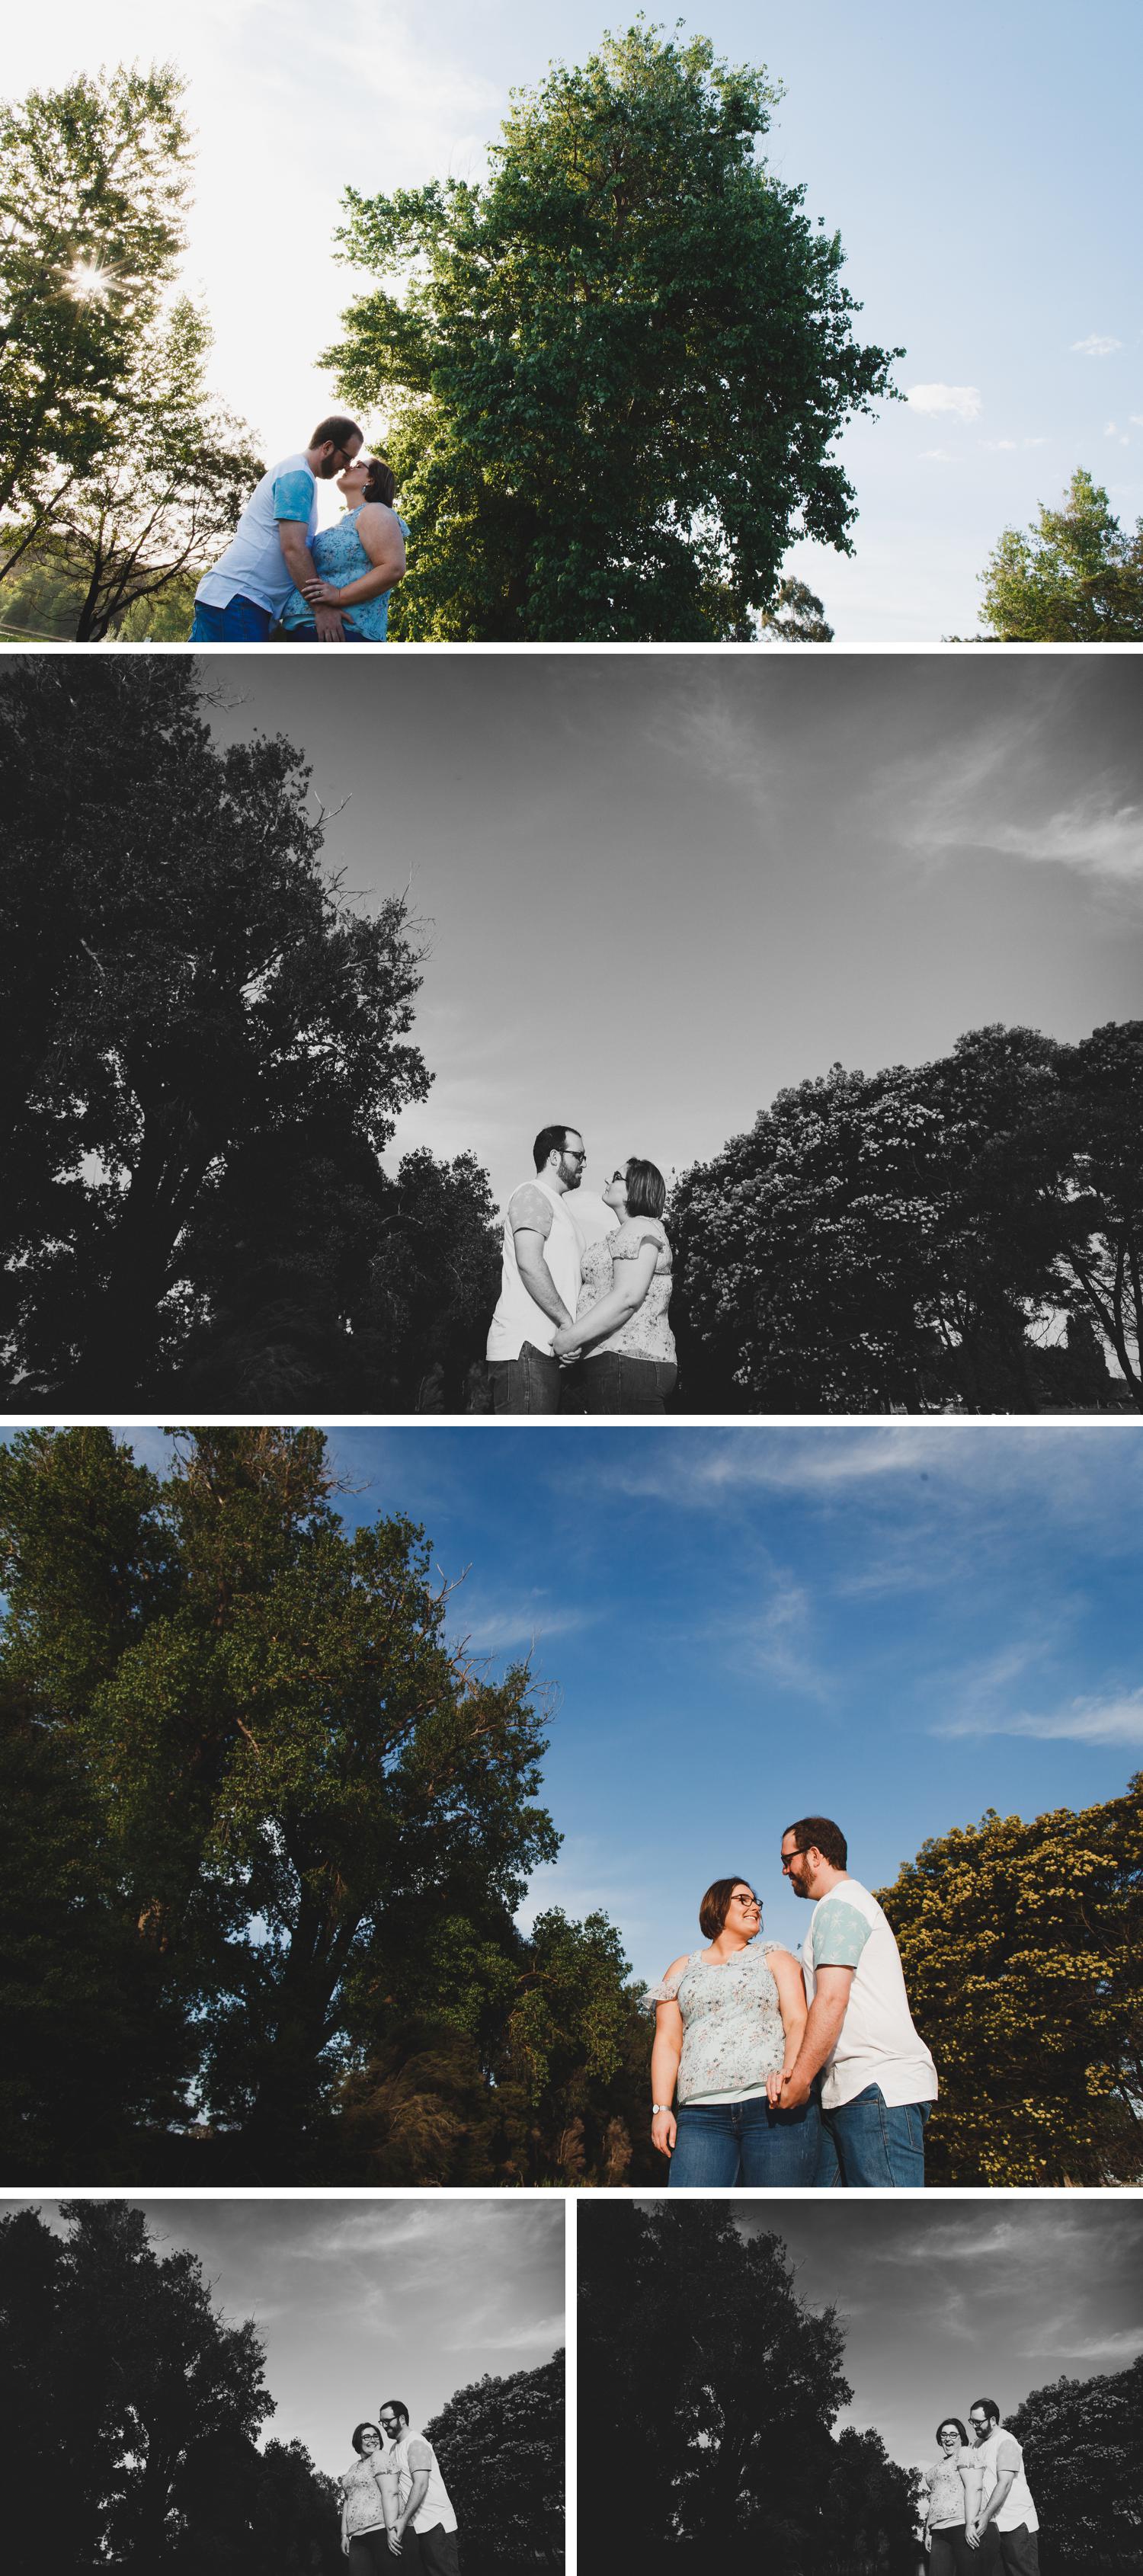 Pre-wedding e-shoot engagement session photography by traralgon photographer danae studios